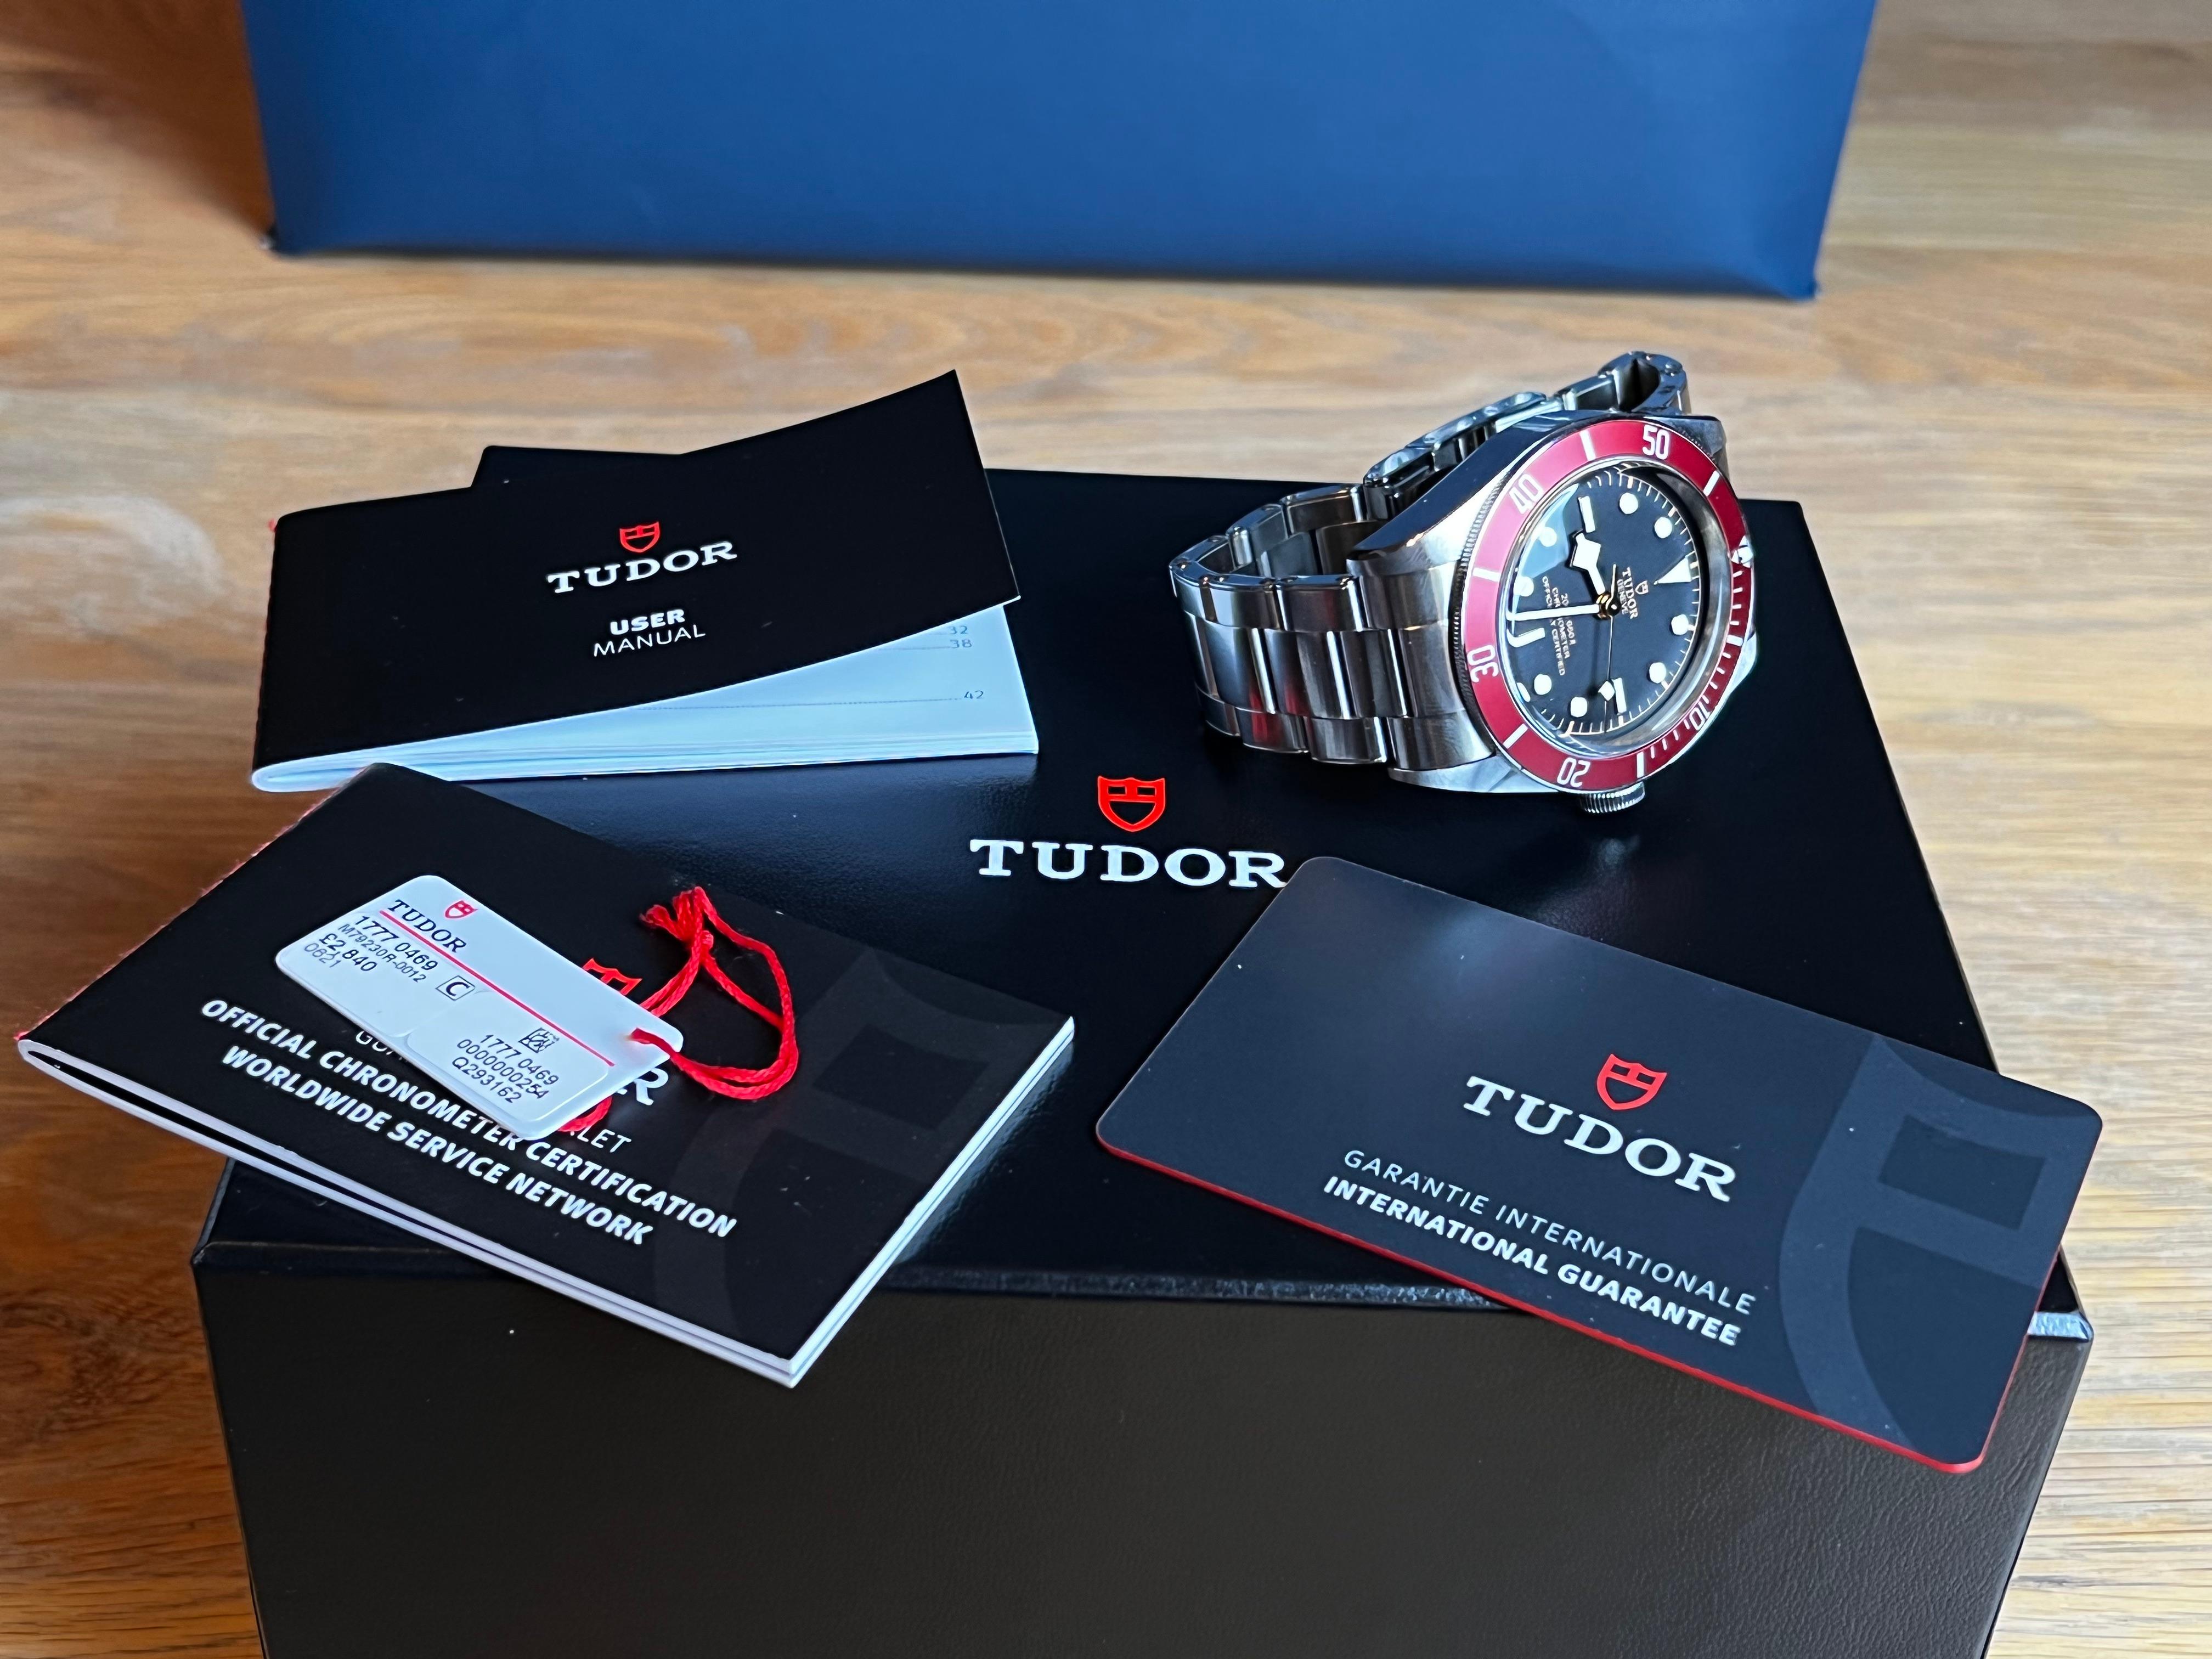 Brand New
Tudor Black Bay (Red)
41mm
Model 79230R
Purchase from Mappin & Webb in London on the 25th June 2021
Full set. All supplied swing tickets, brochure, cards, box and bag (all shown in photos)
Including purchase receipt
This was a prize won by